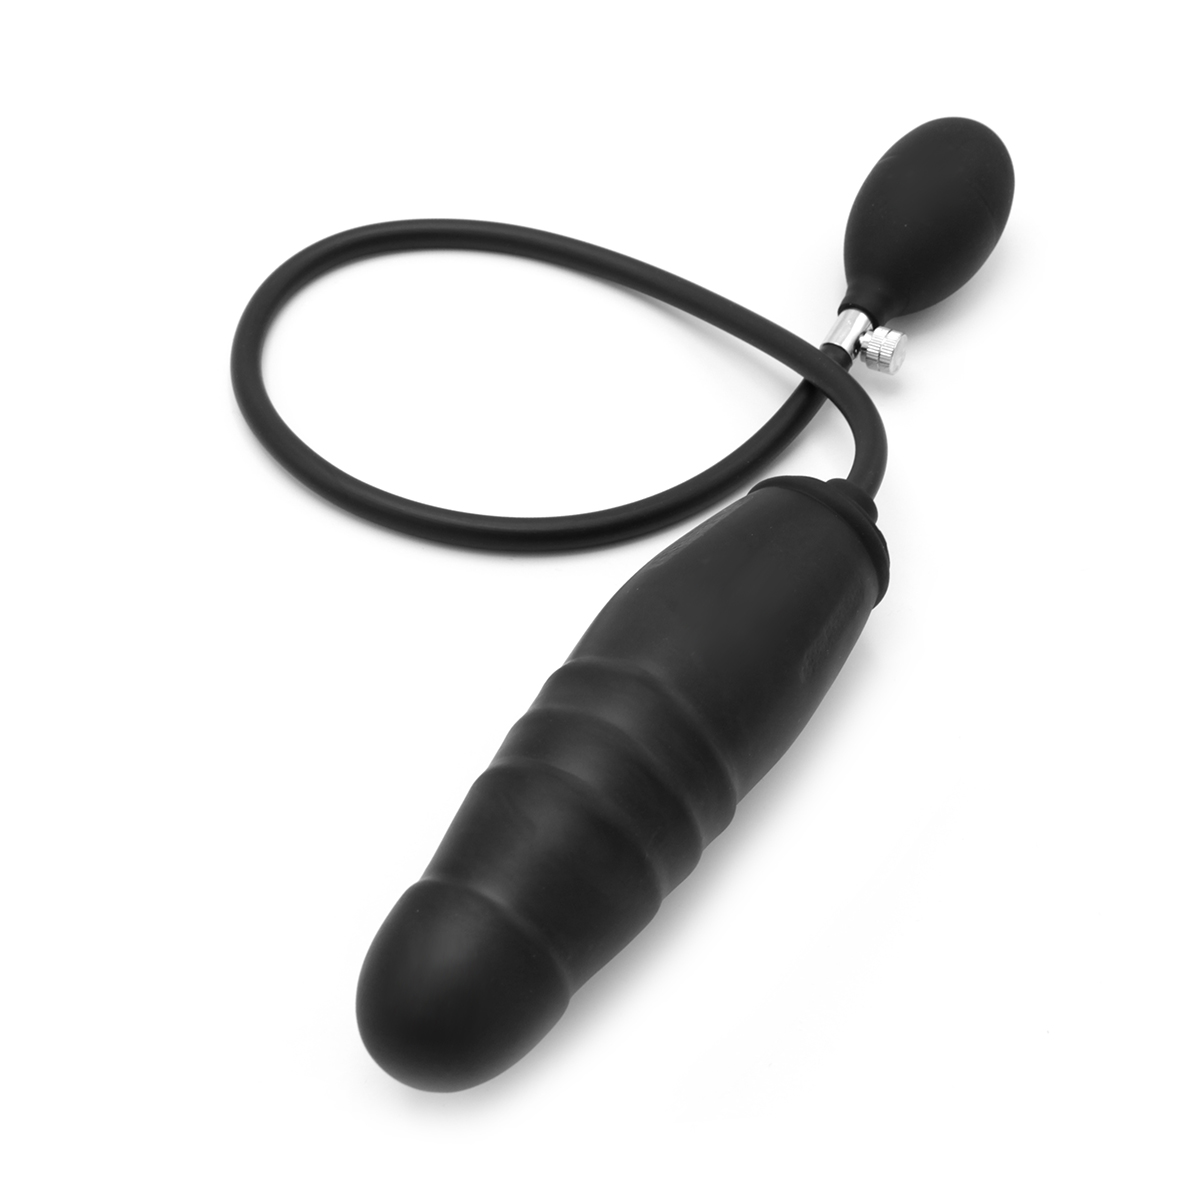 Inflatable-Dildo-Large-Ribbed-Rings-OPR-321079-1